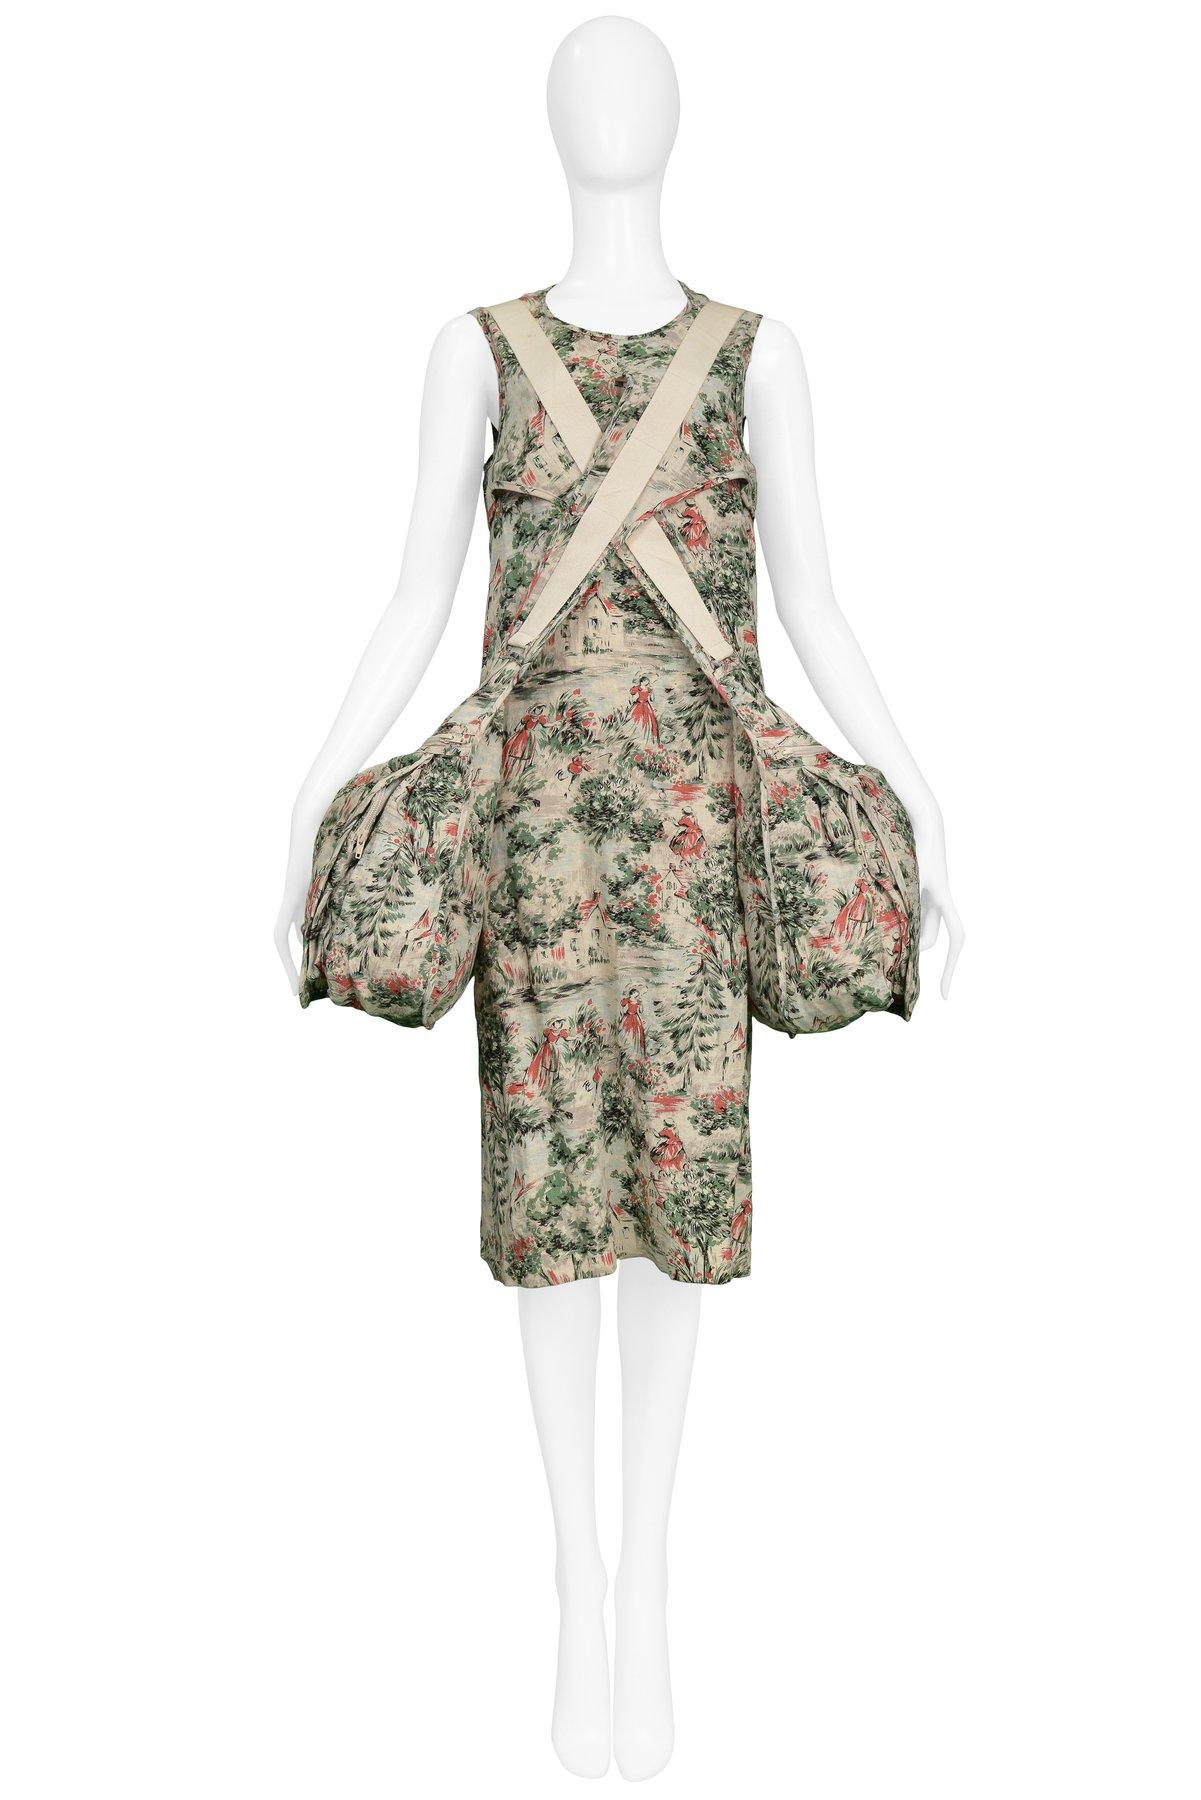 Resurrection Vintage is excited to offer a vintage Junya Watanabe linen pictorial print parachute double bag dress. The parachute dress features a pink, green, and black country scene print on an off-white background, tank sleeves, a keyhole back,